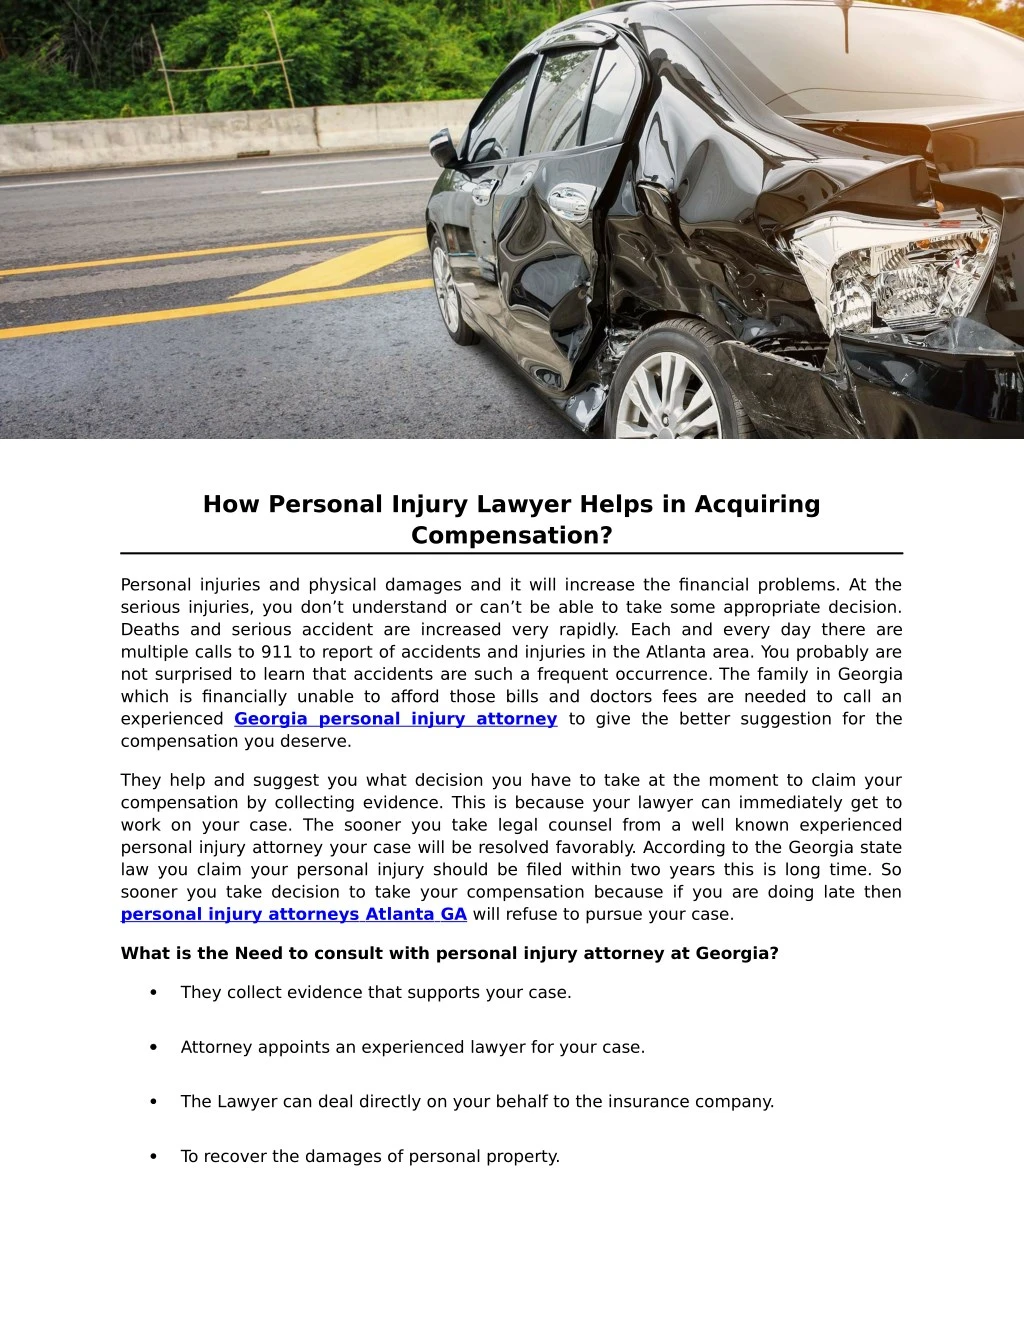 how personal injury lawyer helps in acquiring